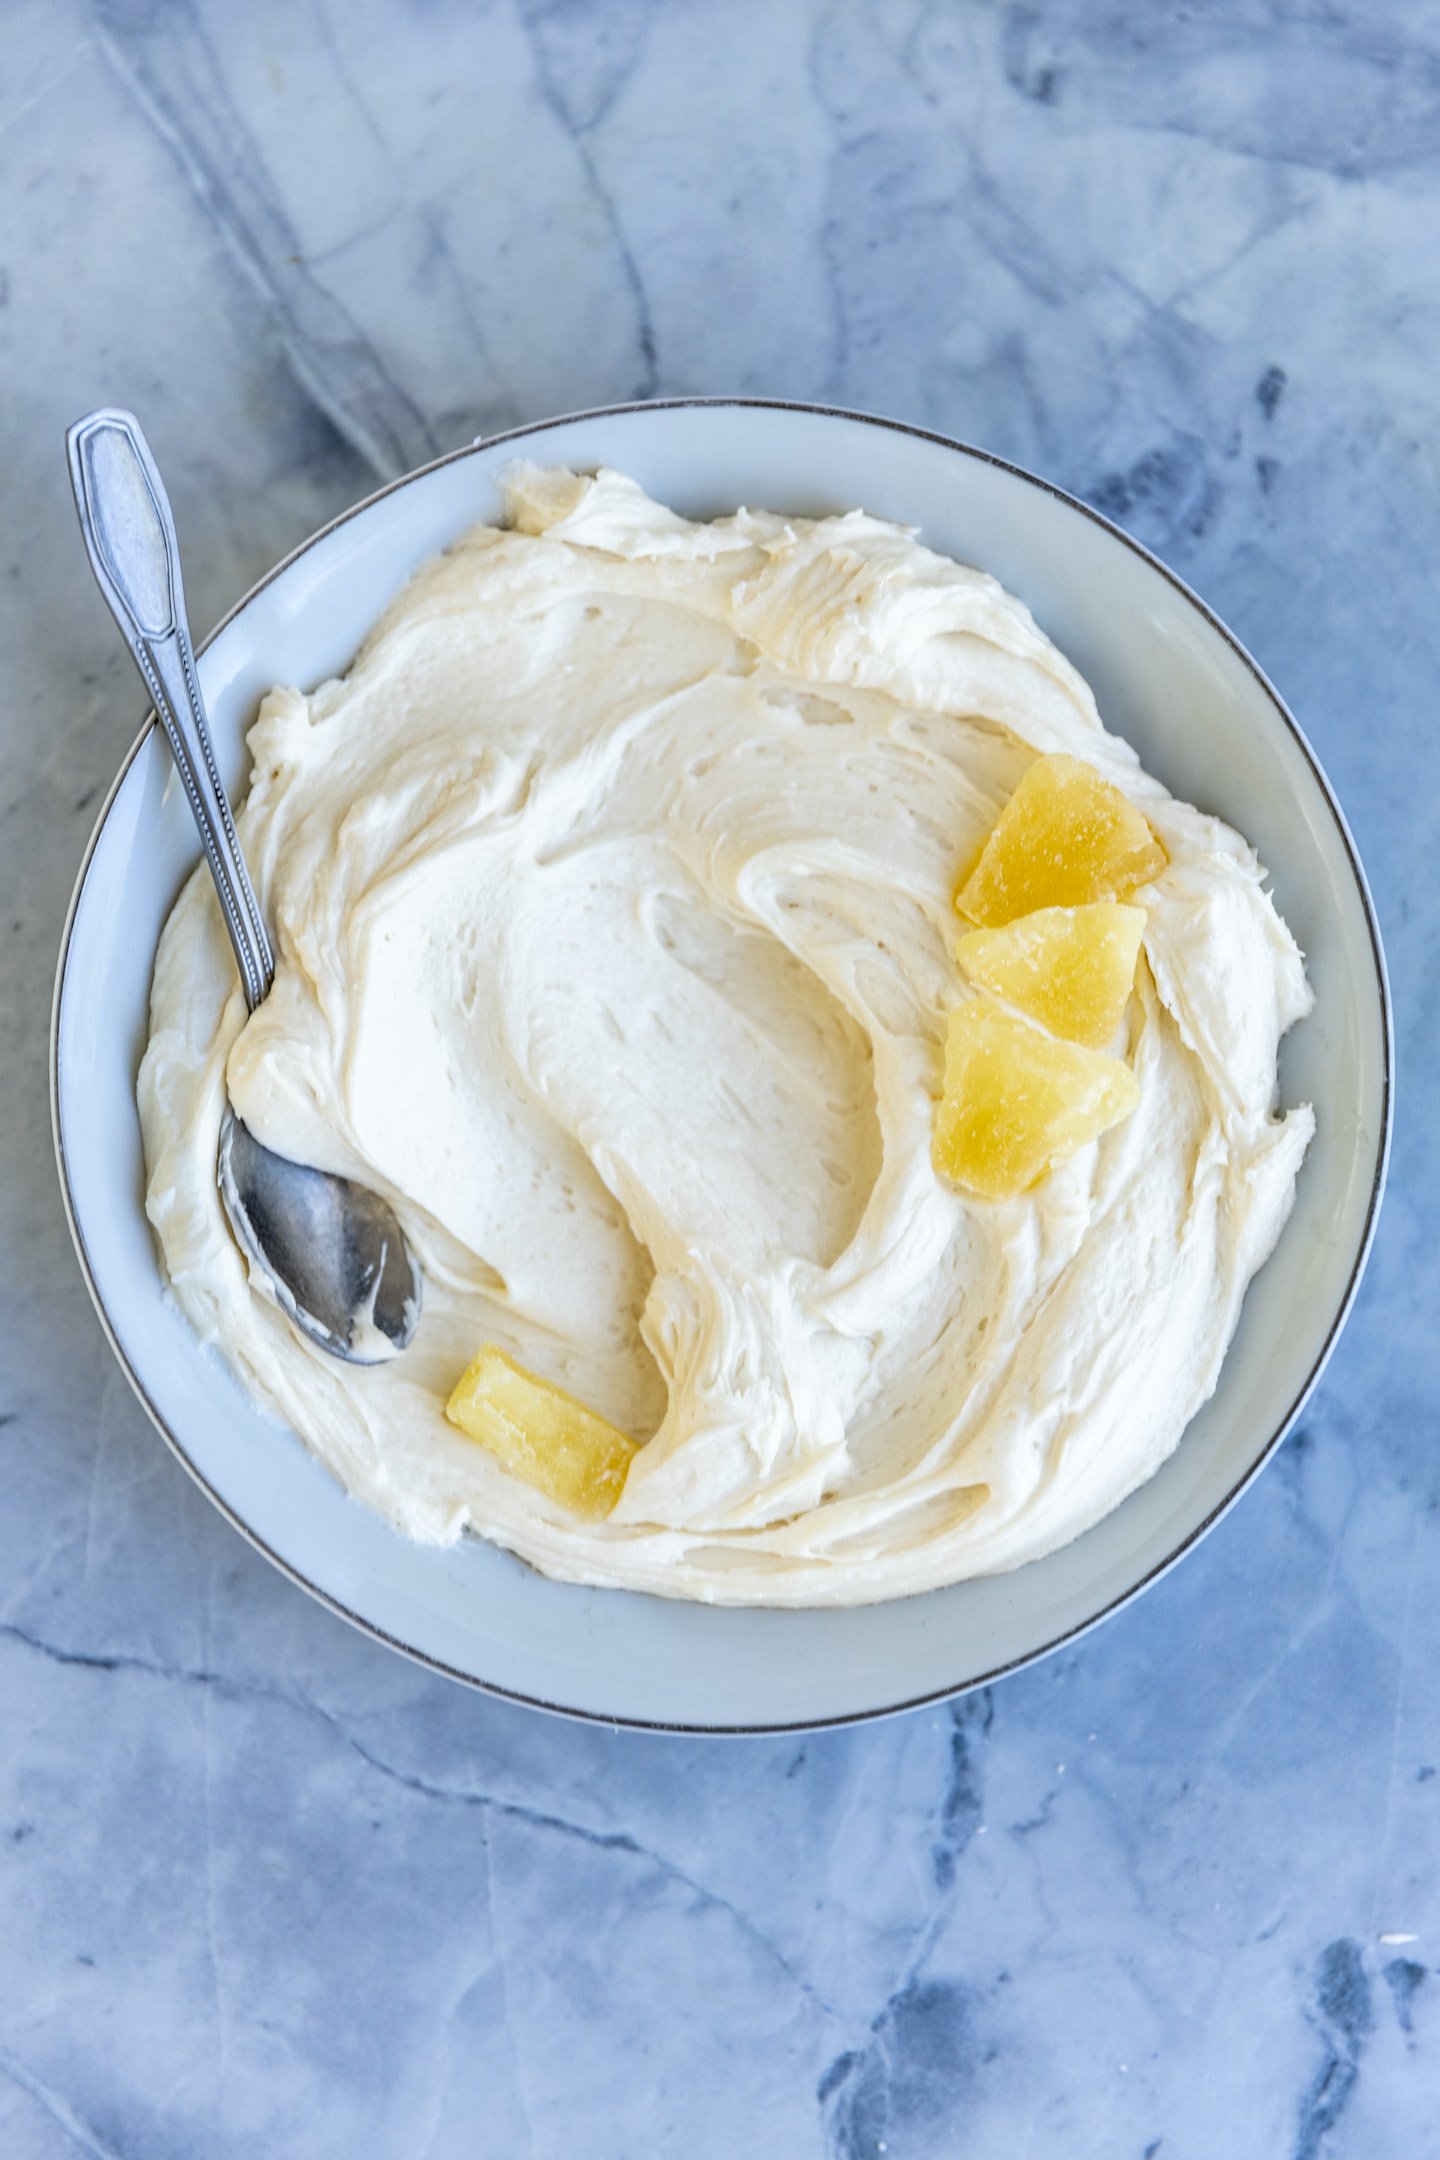 Pineapple frosting in a white bowl on a blue surface.